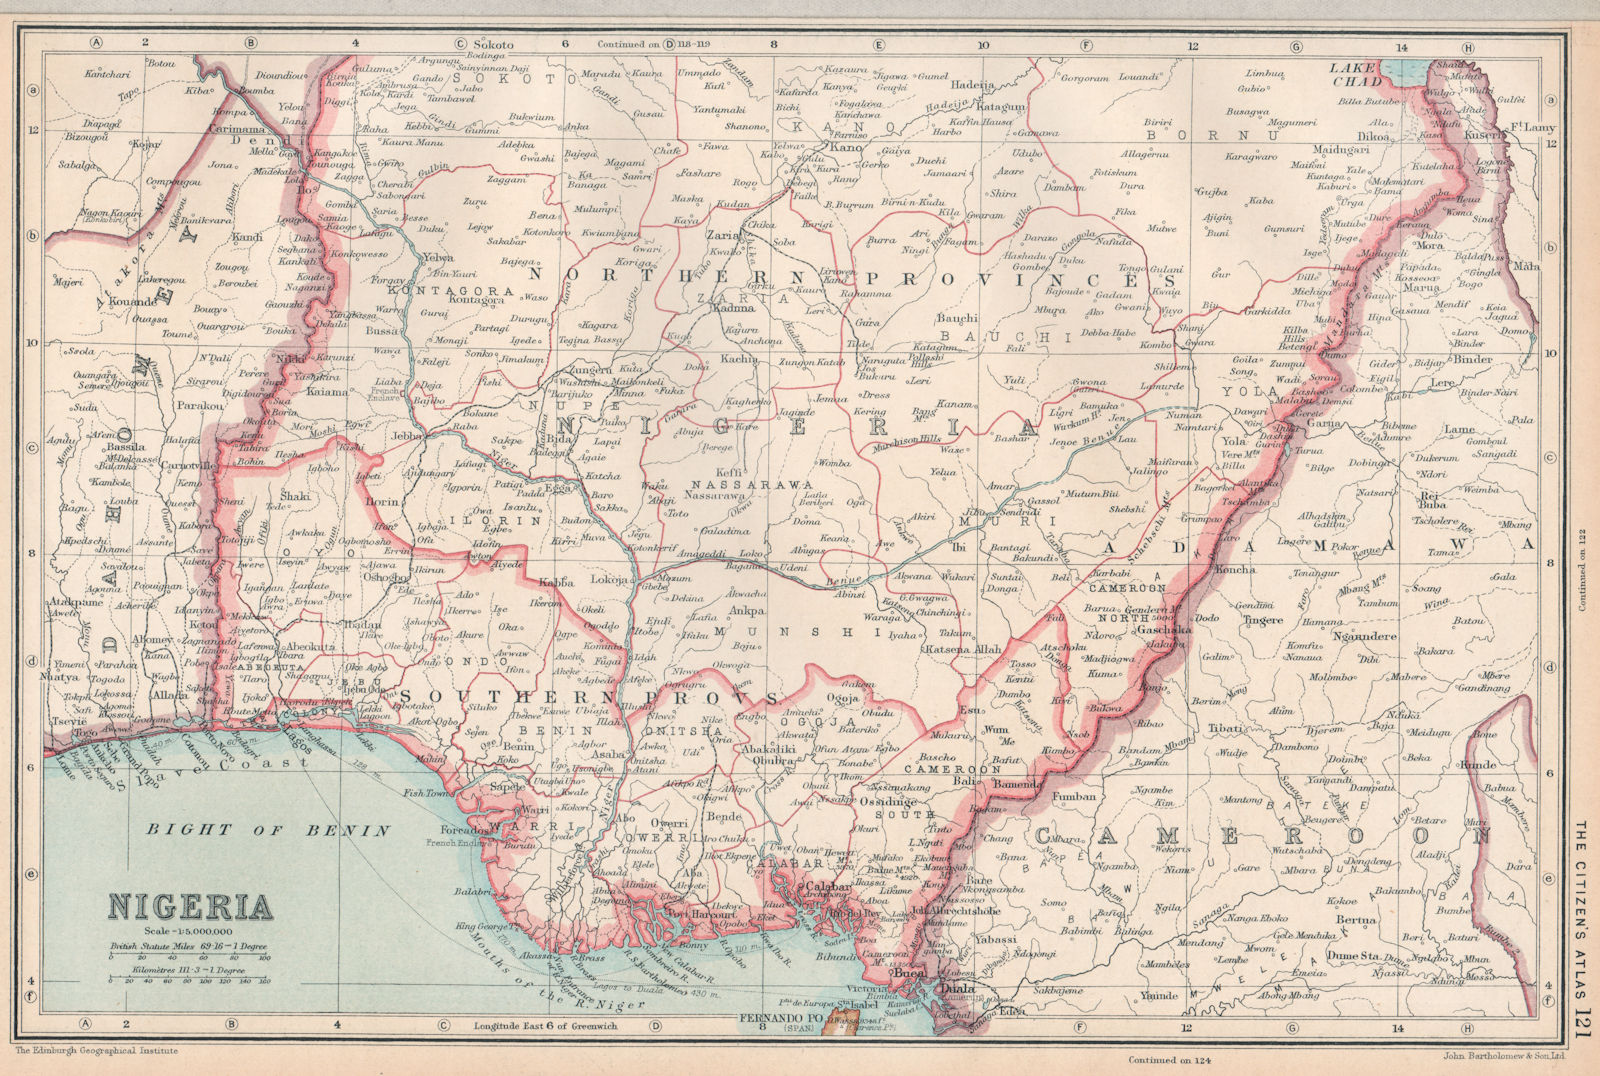 NIGERIA. divided into Northern & Southern provinces. BARTHOLOMEW 1924 old map